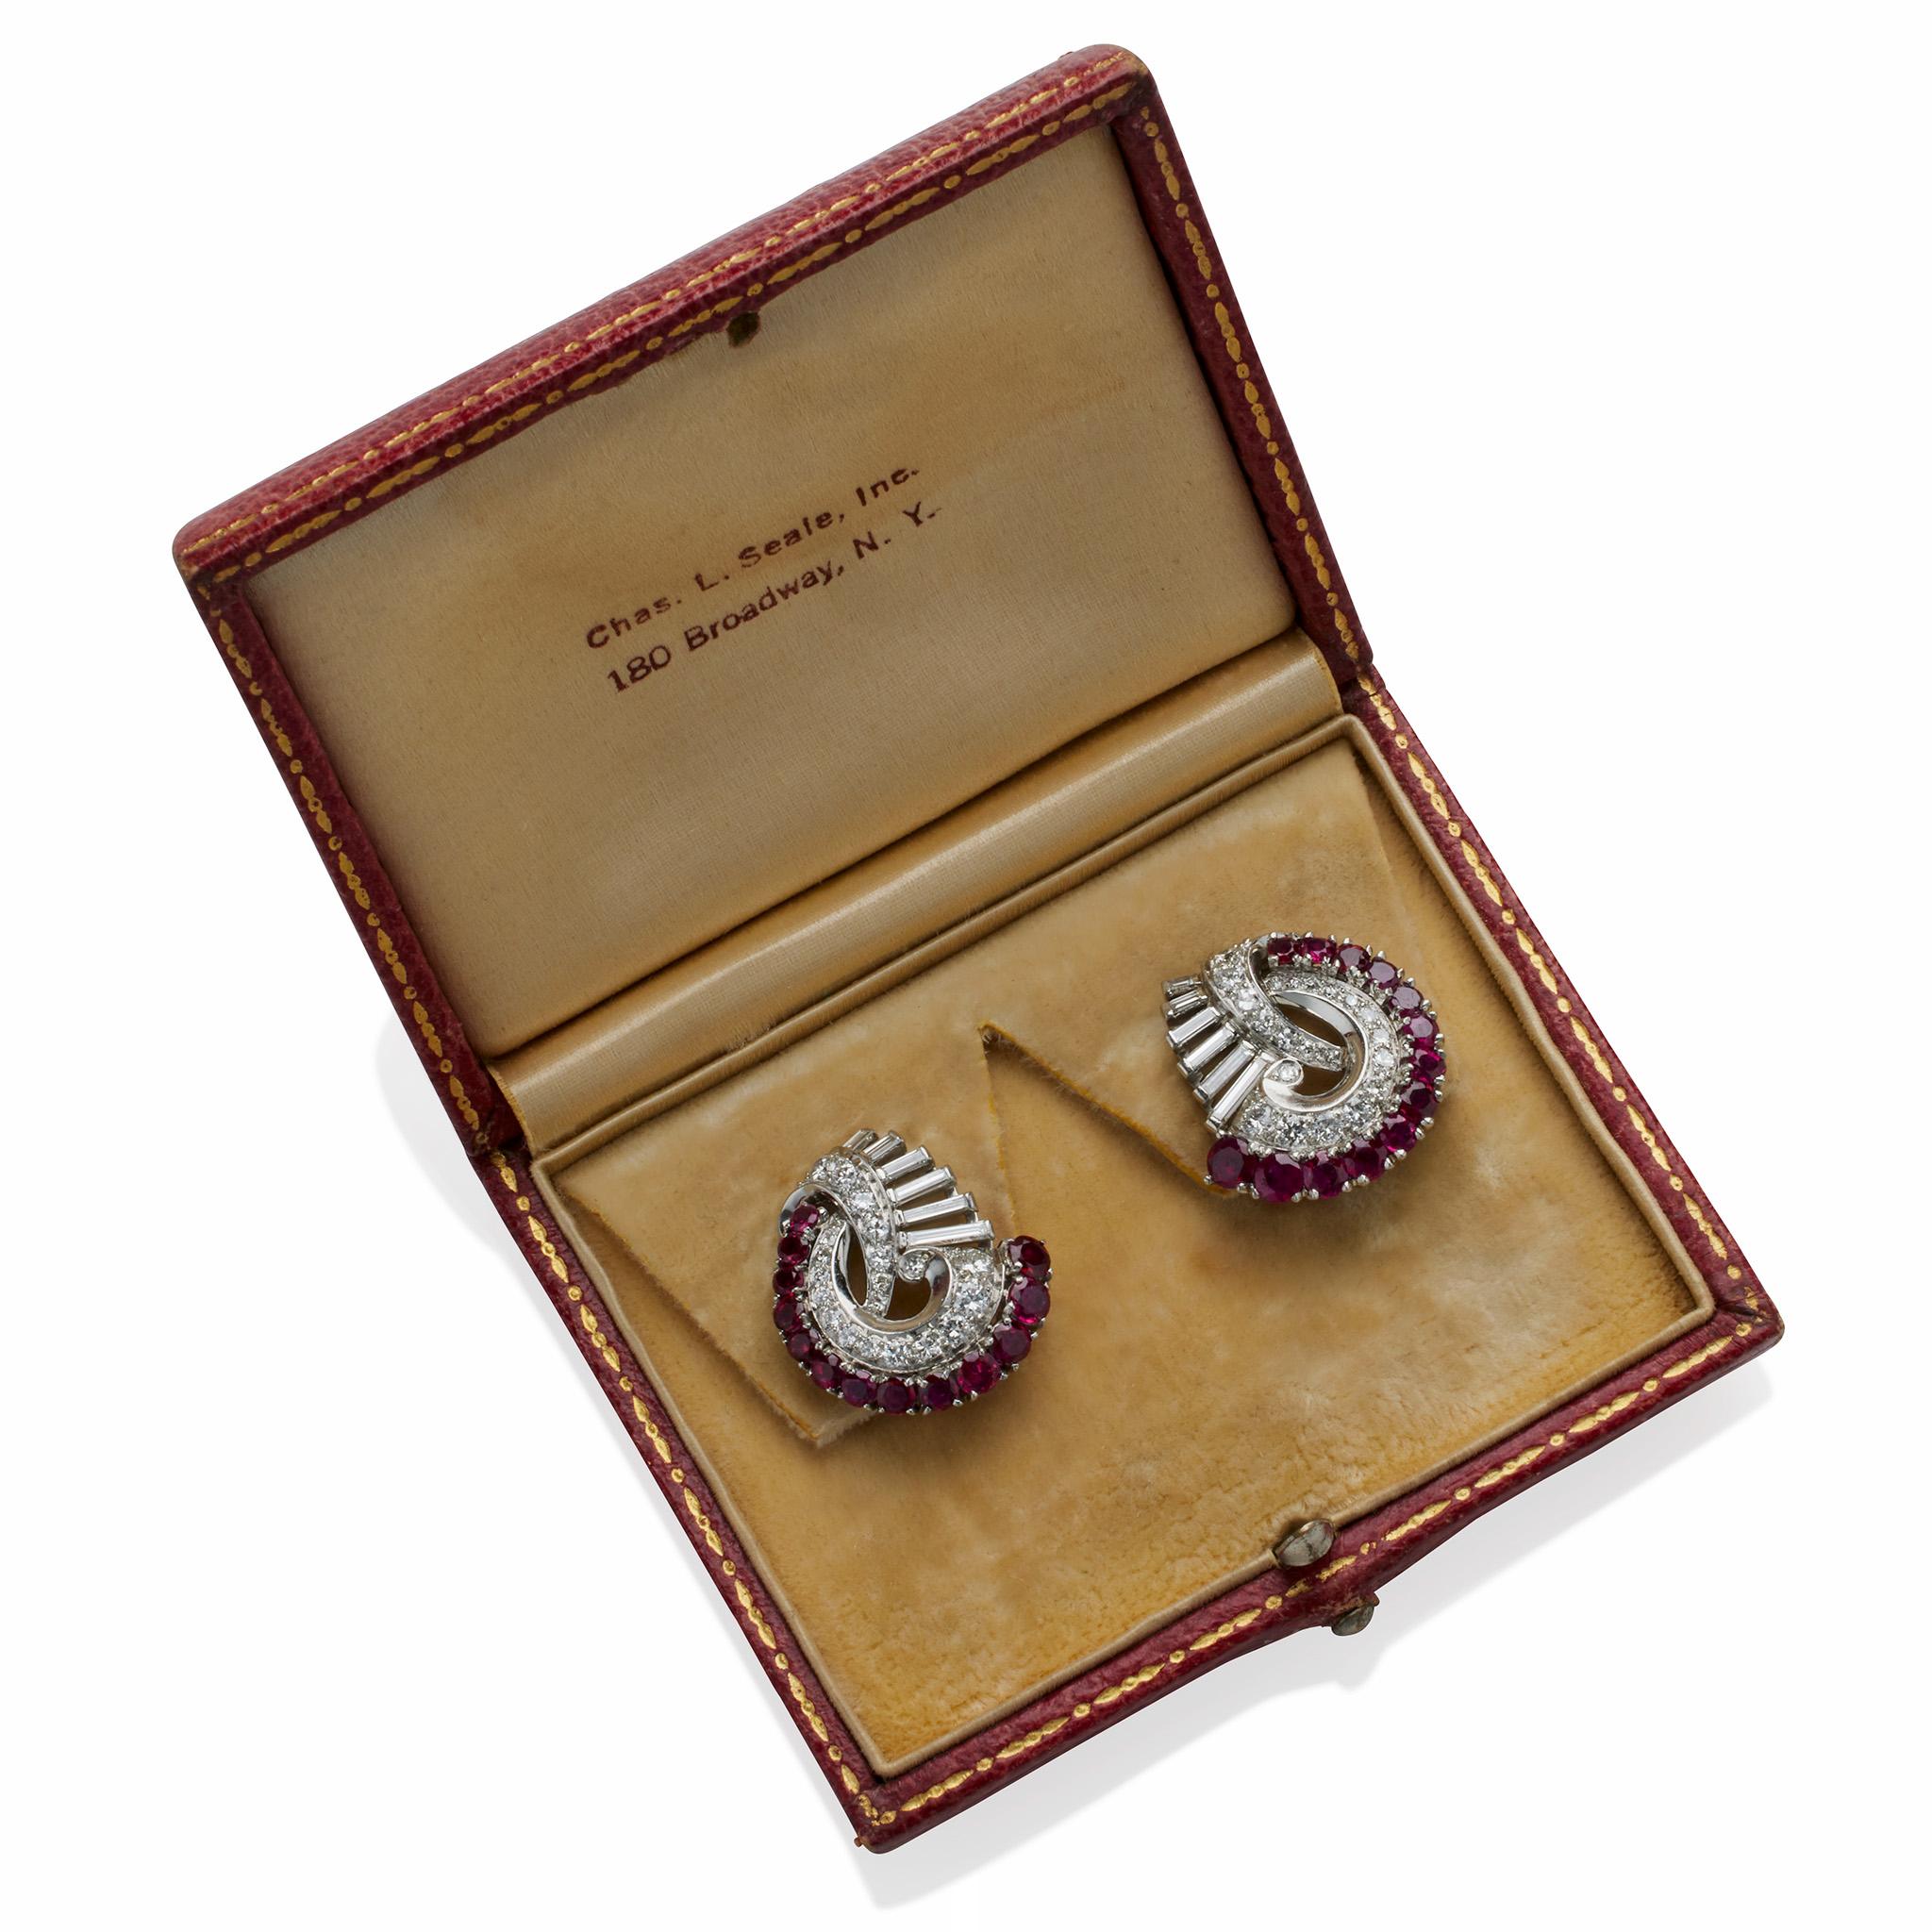 These diamond, ruby and platinum clip earrings date from the 1940s. Each clip earring is designed as an abstract swirl composed of round-cut rubies and diamonds, off-set by a plain polished scrolling element and graduating line of elongated